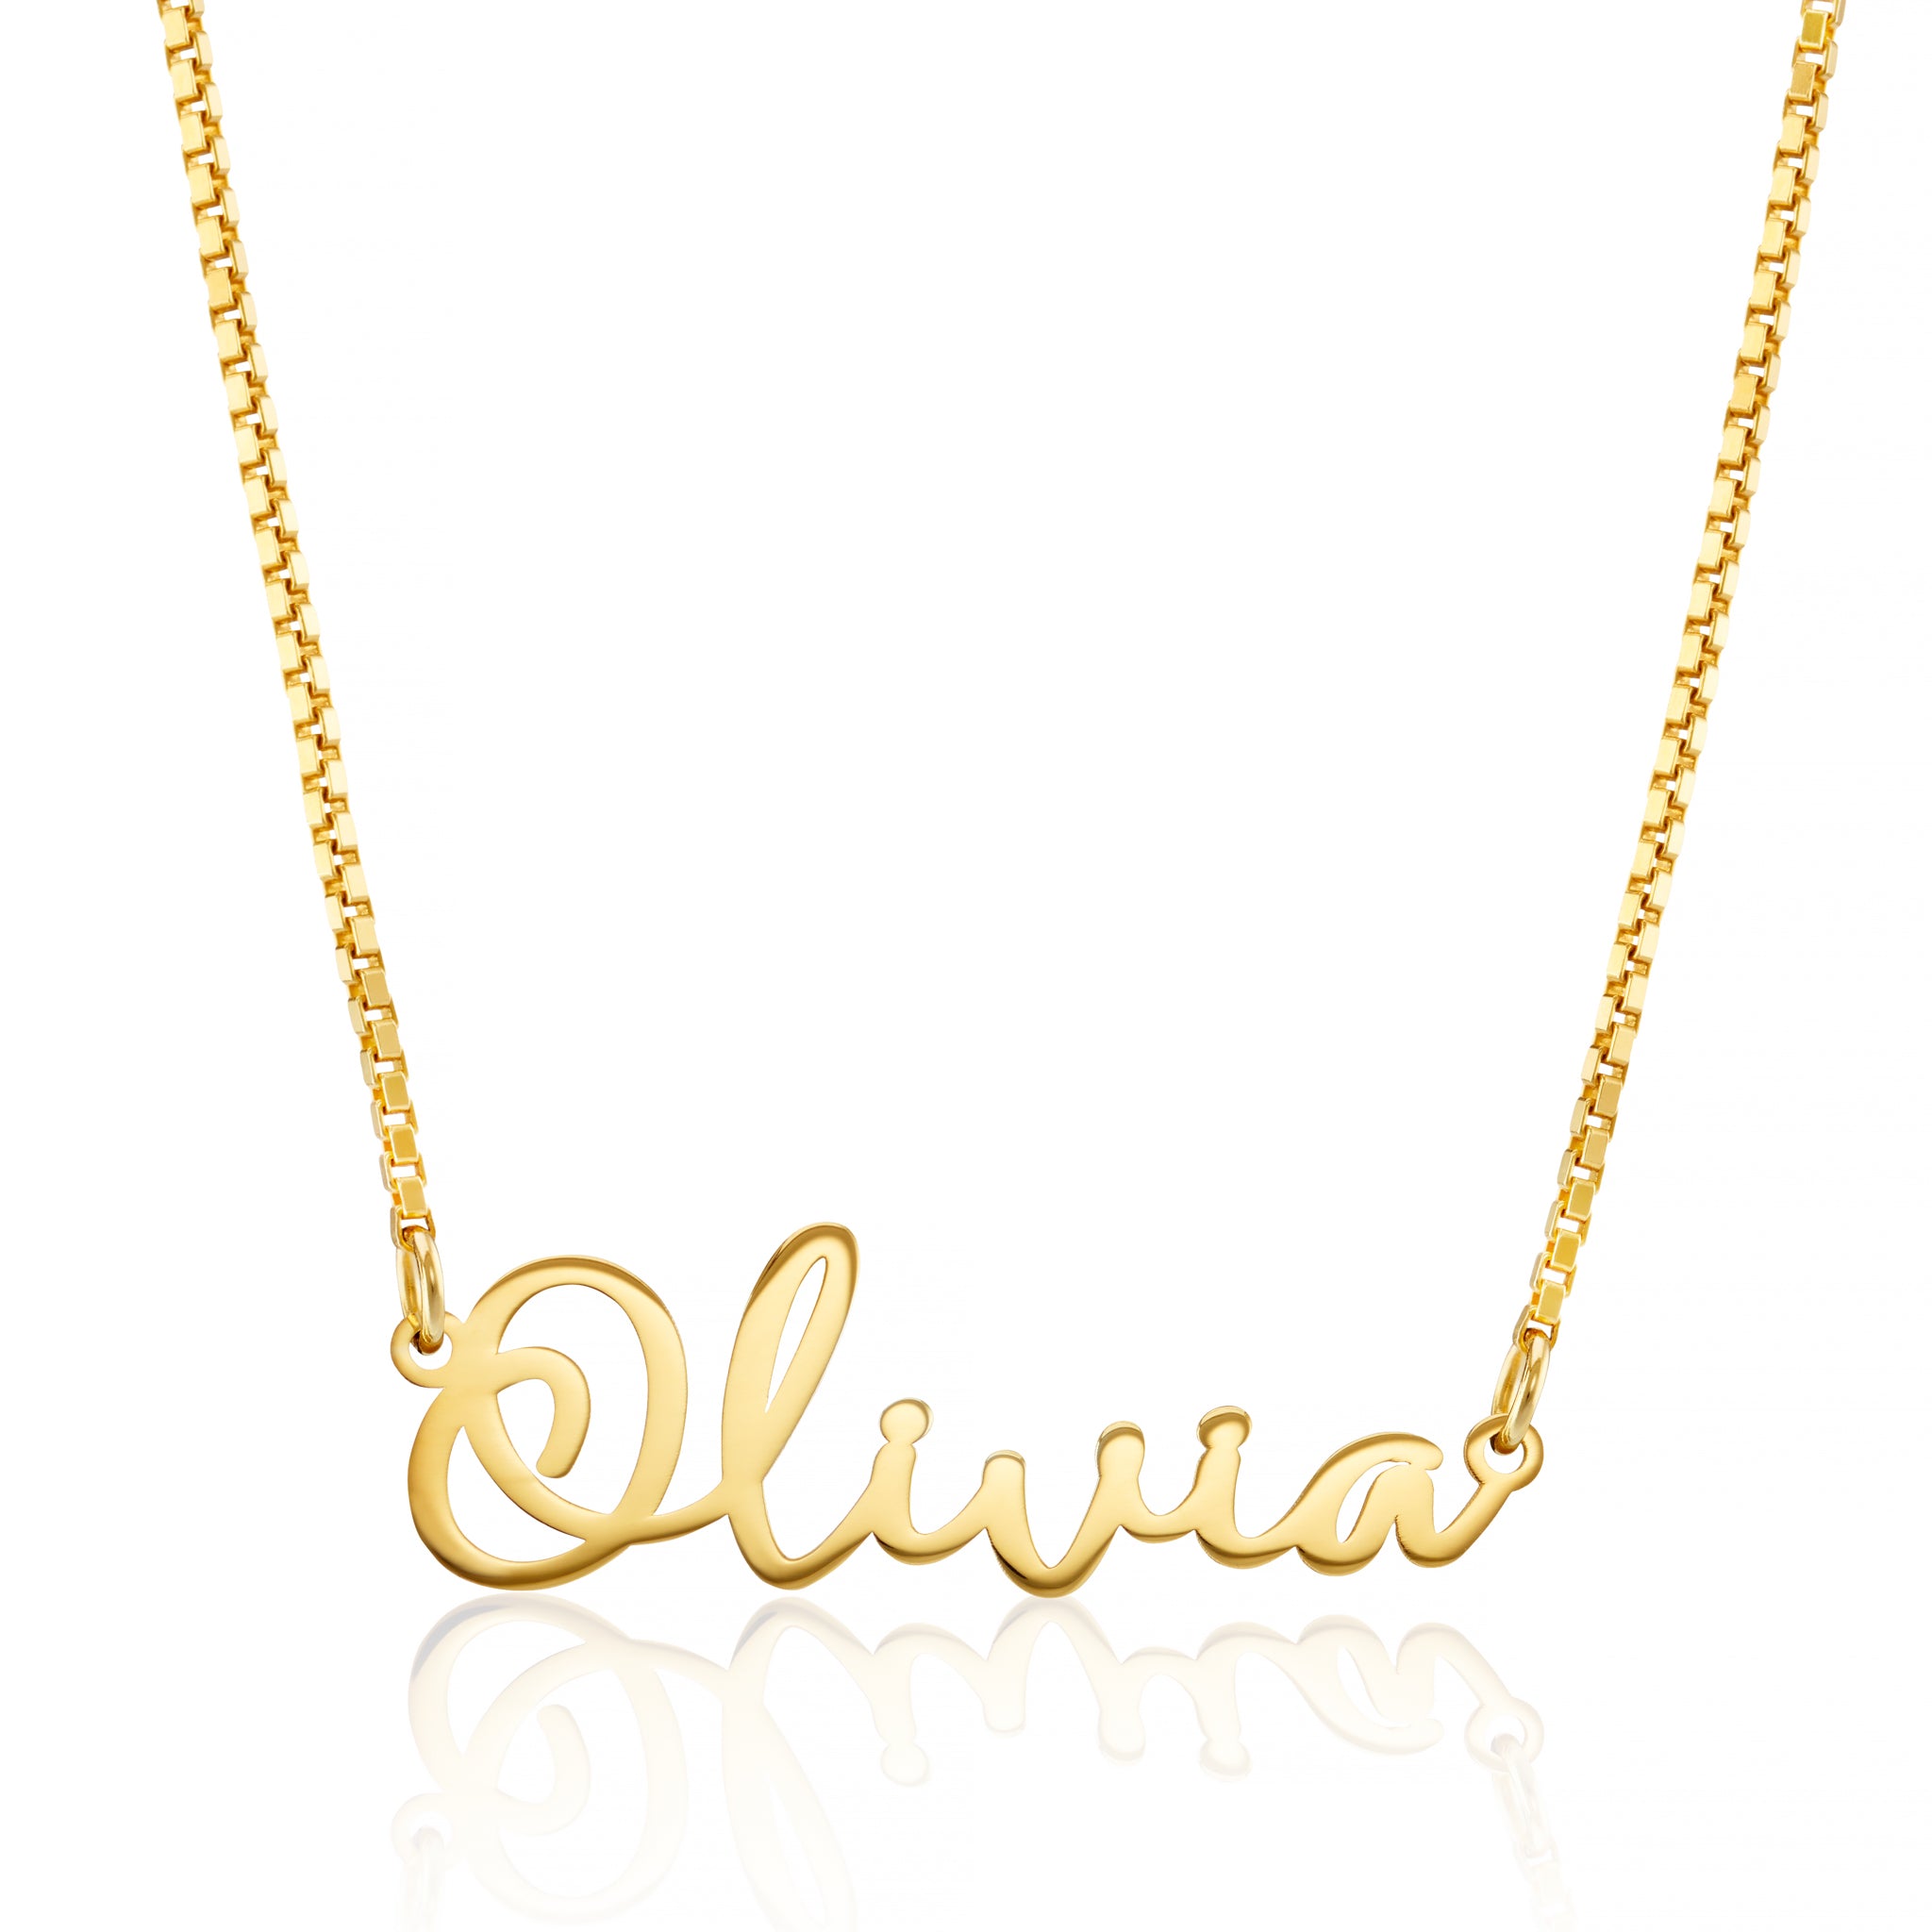 Personalised Name Necklace | Available in Silver, Gold or Rose Gold